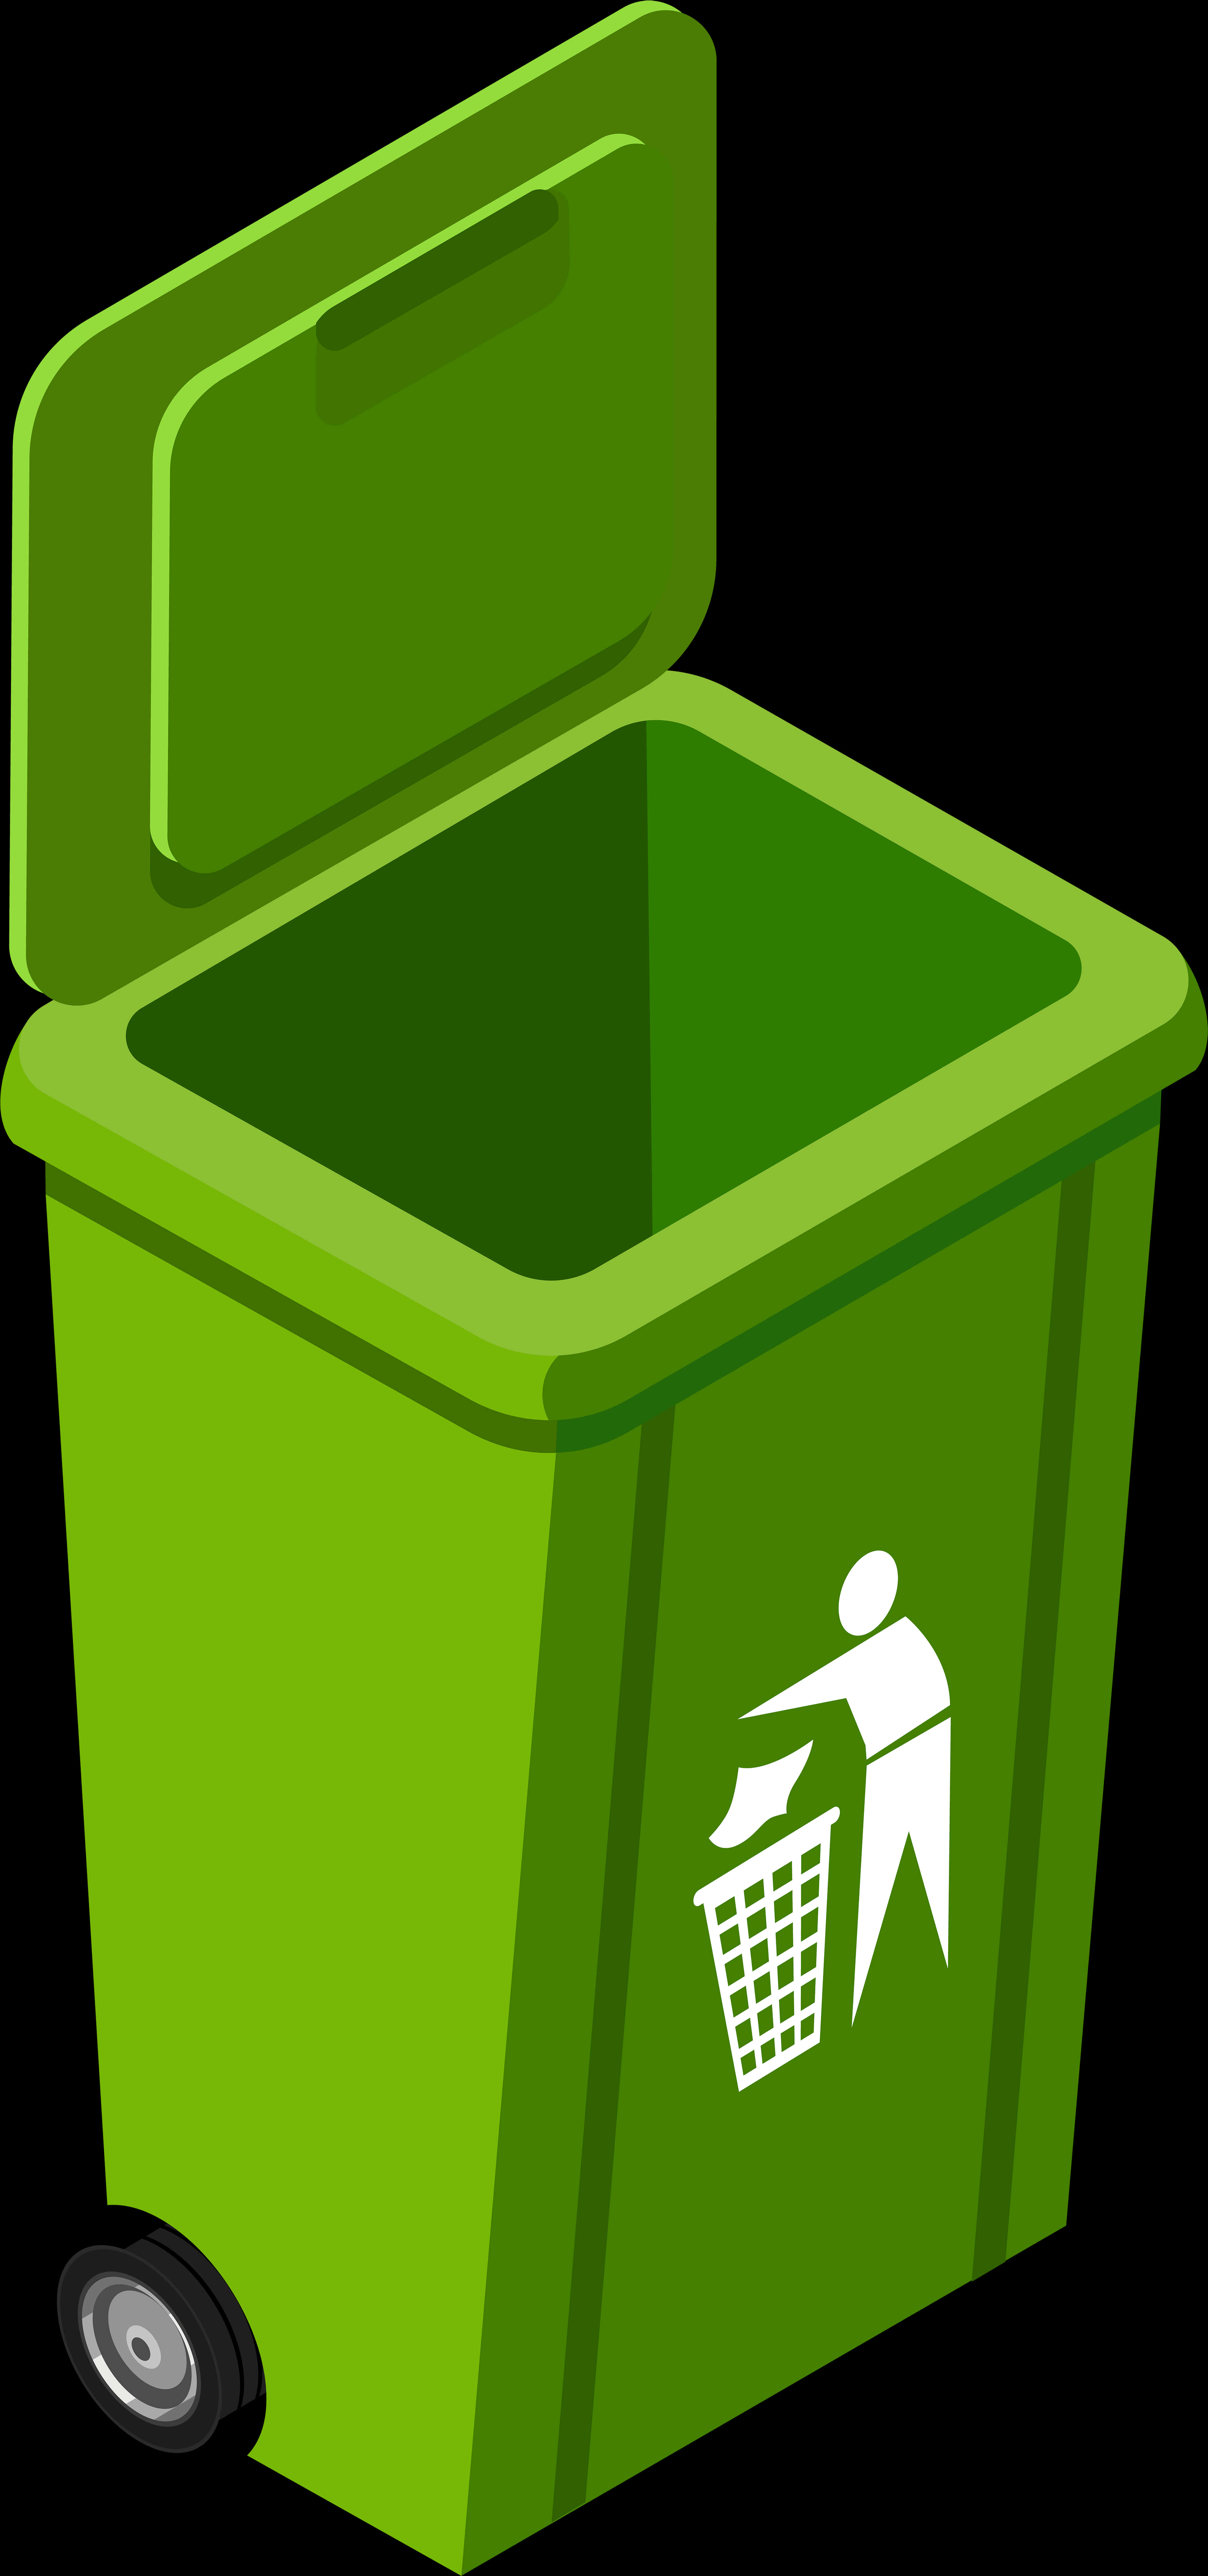 A Green Trash Can With A Lid Open